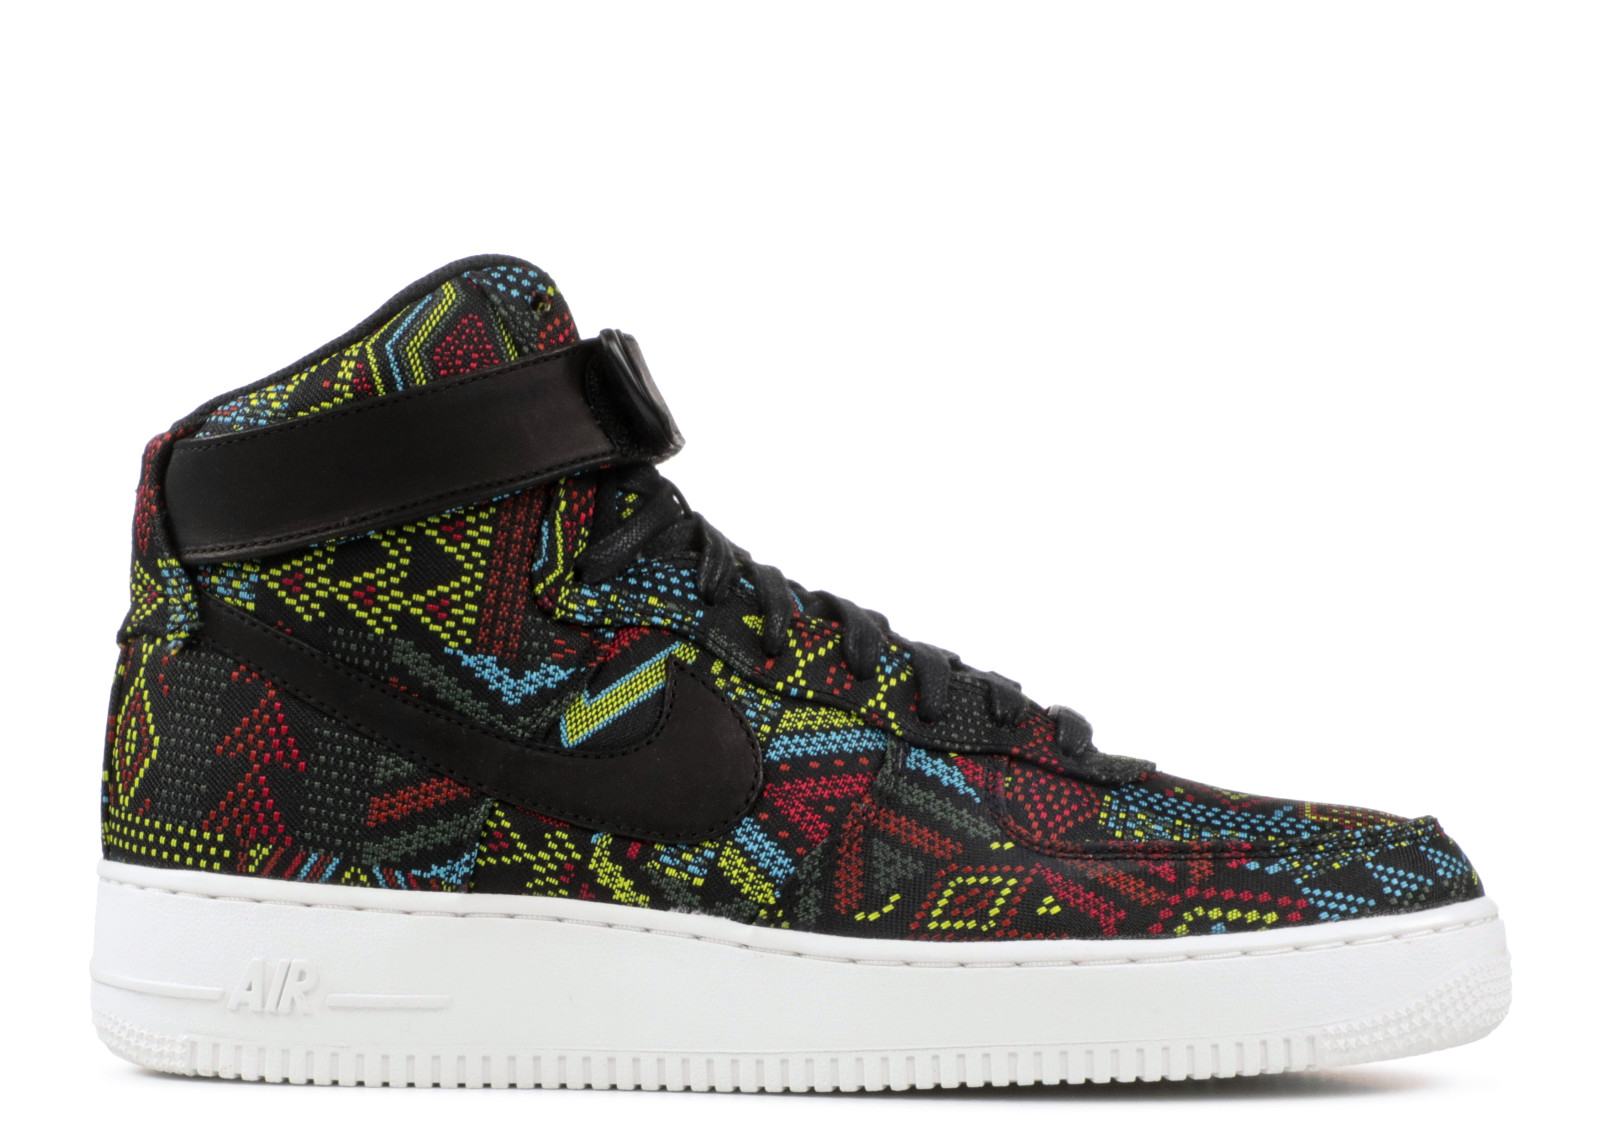 Buy - nike air force one high bhm - OFF 